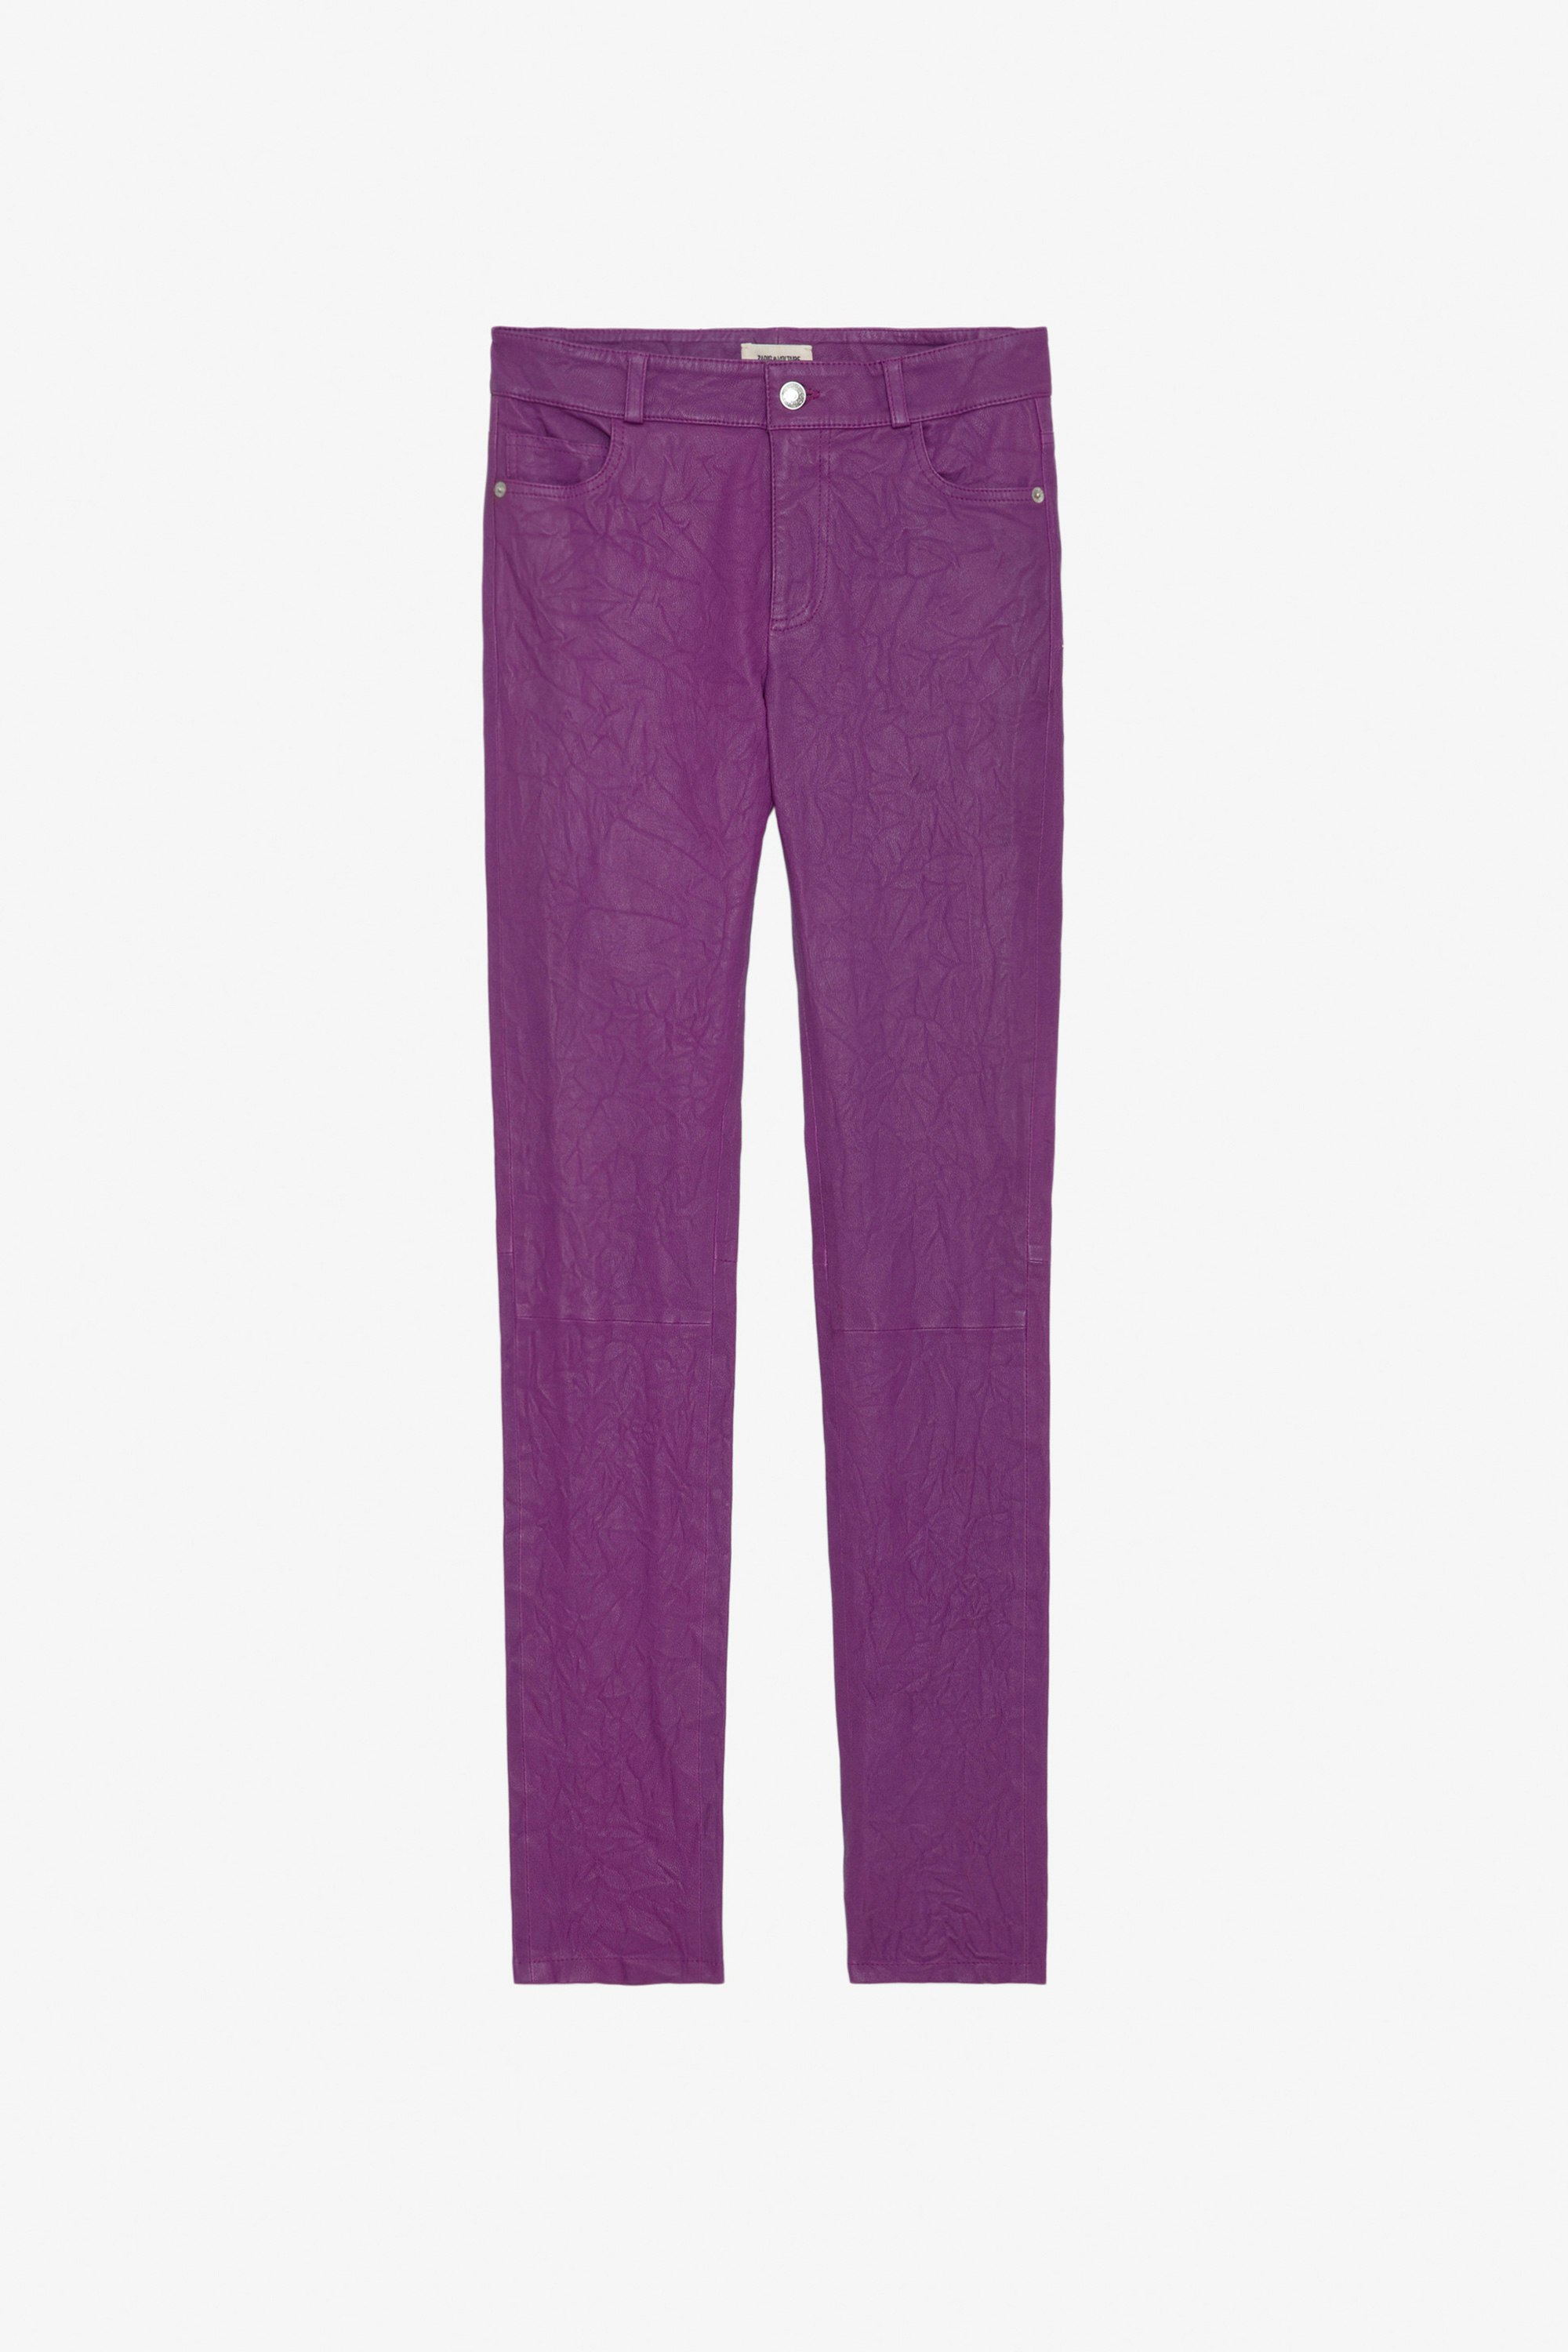 Phlame Crinkled Leather Pants - Purple crinkled leather pants with pockets.